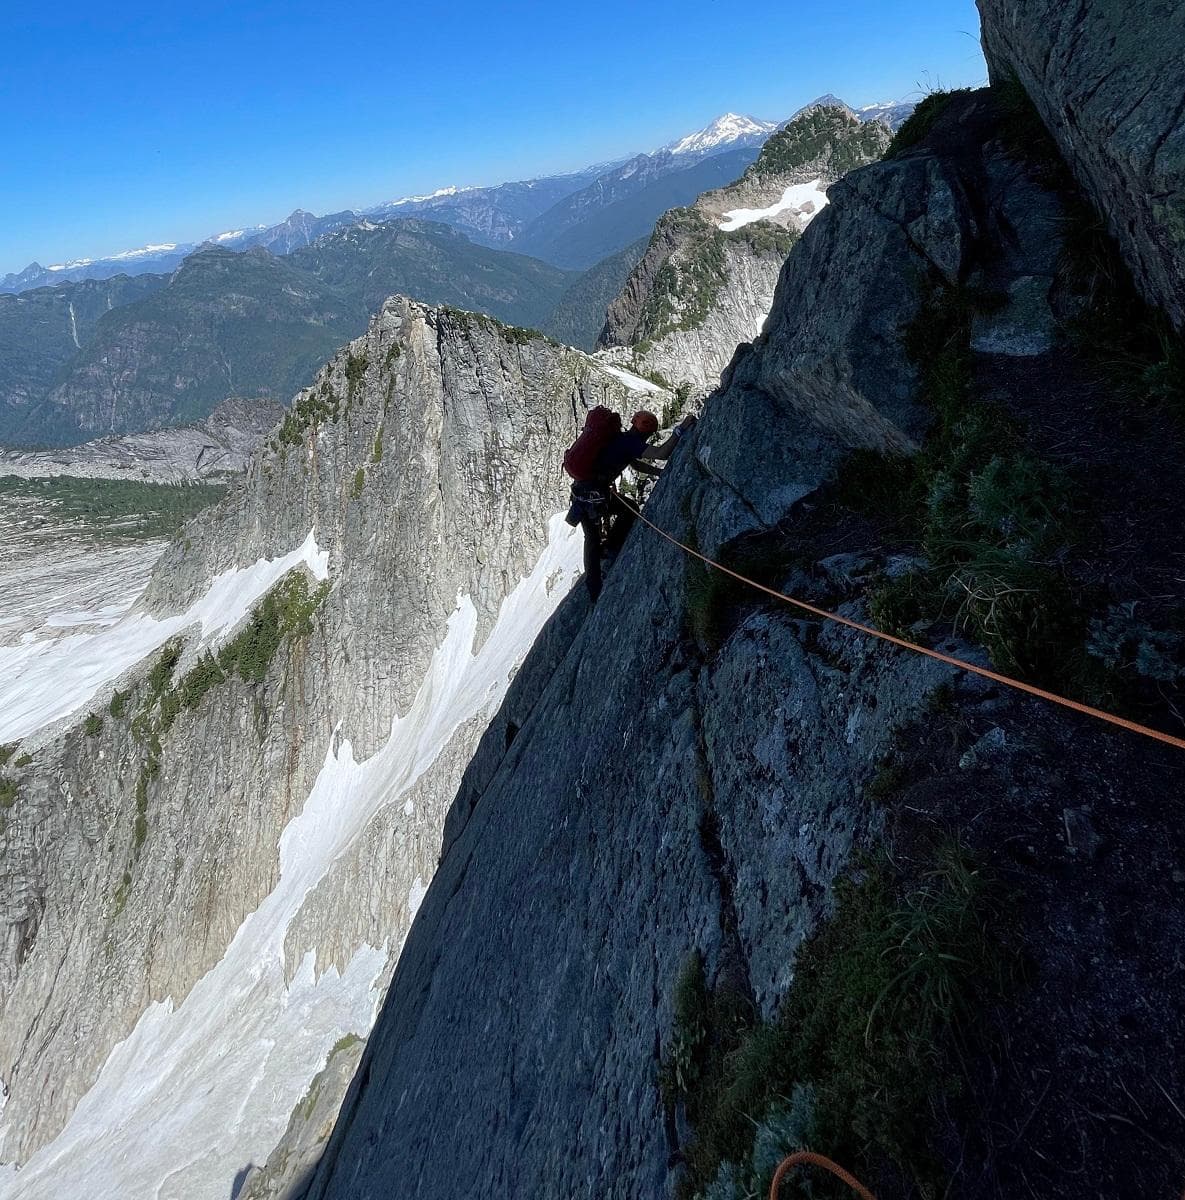 Warning: This climber risks a pendulum swing if they fall